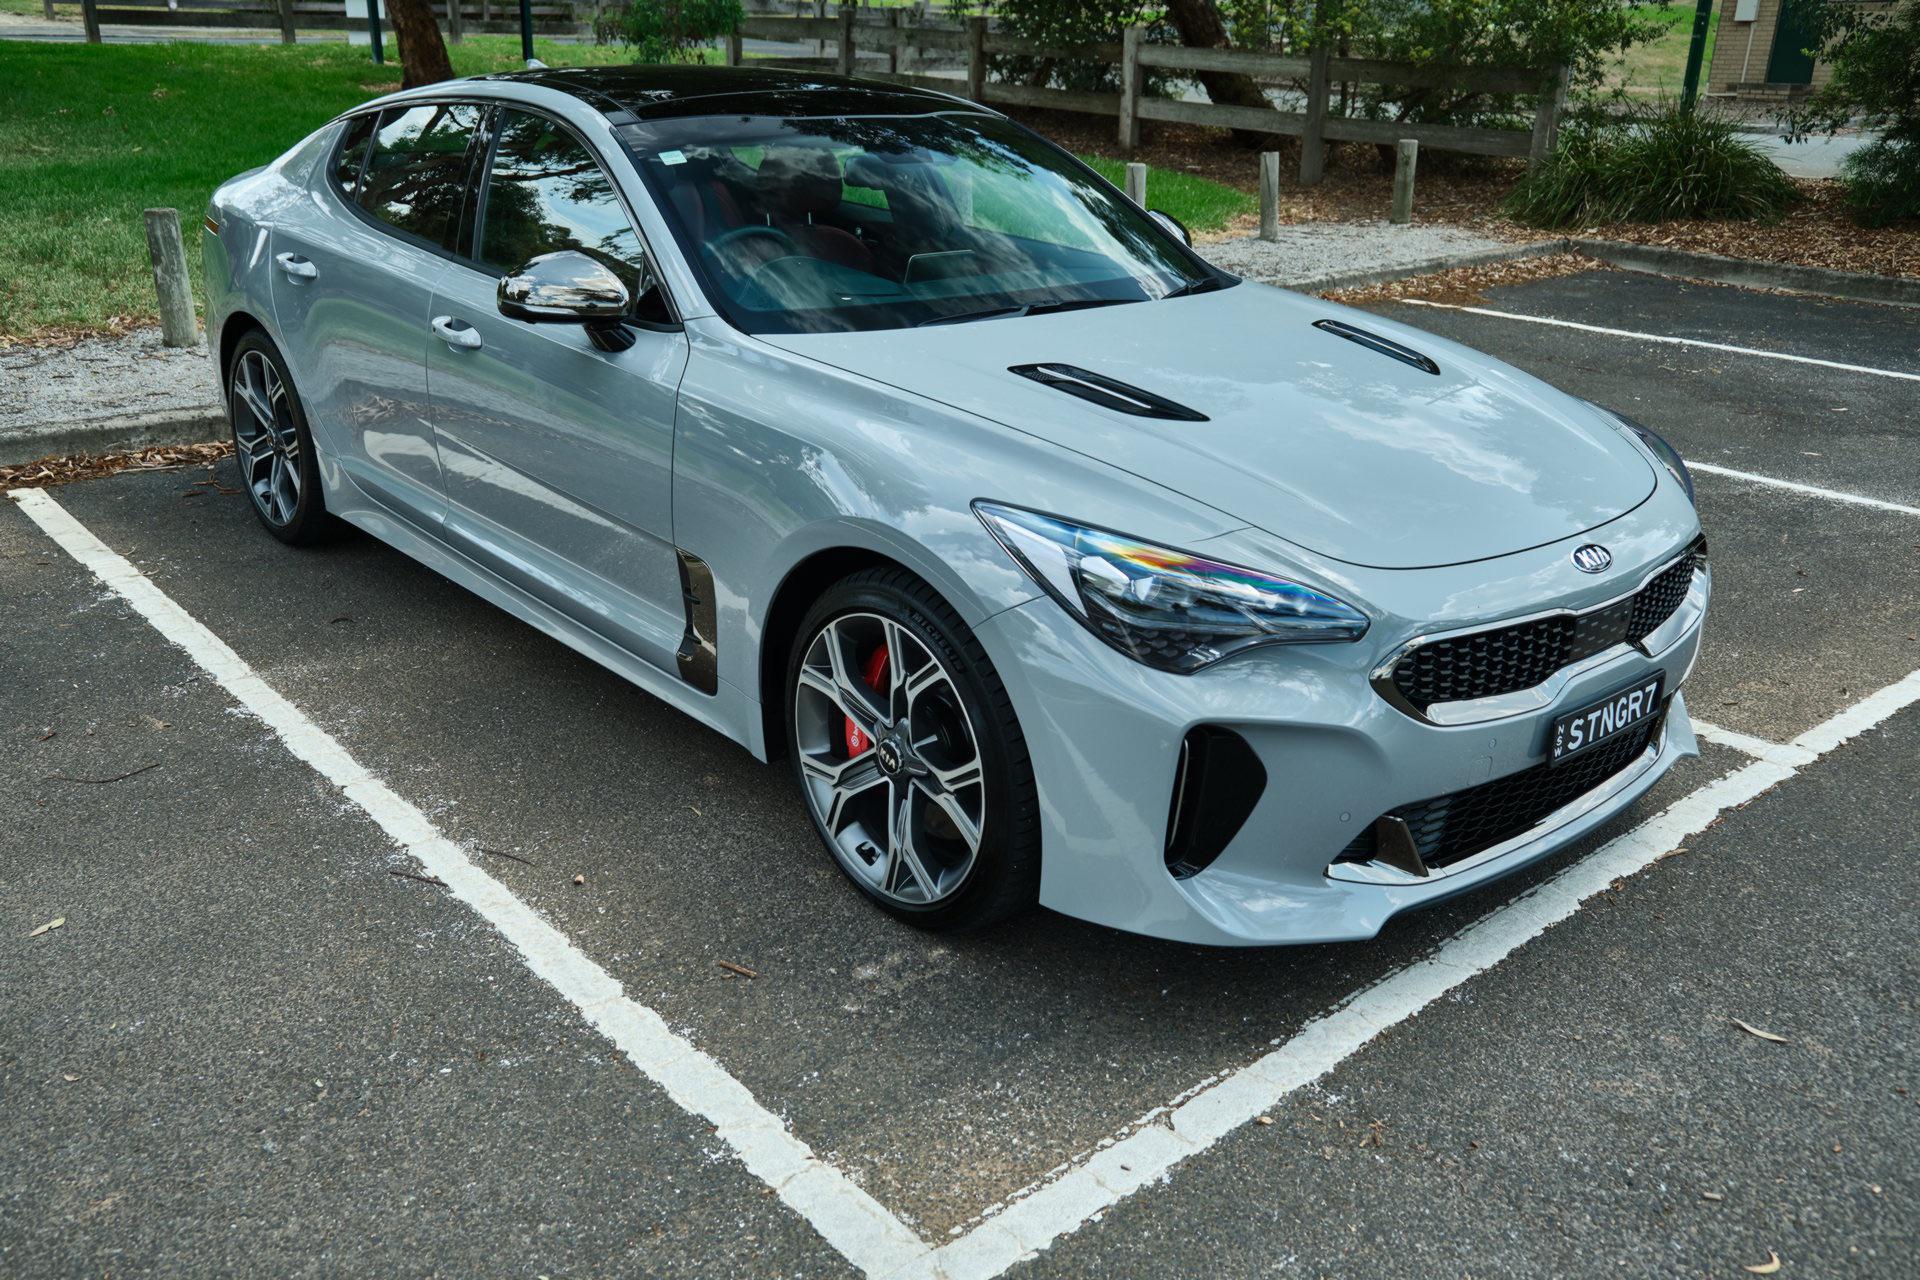 2023 Stinger GT: I placed an order for a Kia Stinger GT with my Canadian  dealer. I was told at this point mine will be a 2023 model. So I asked what